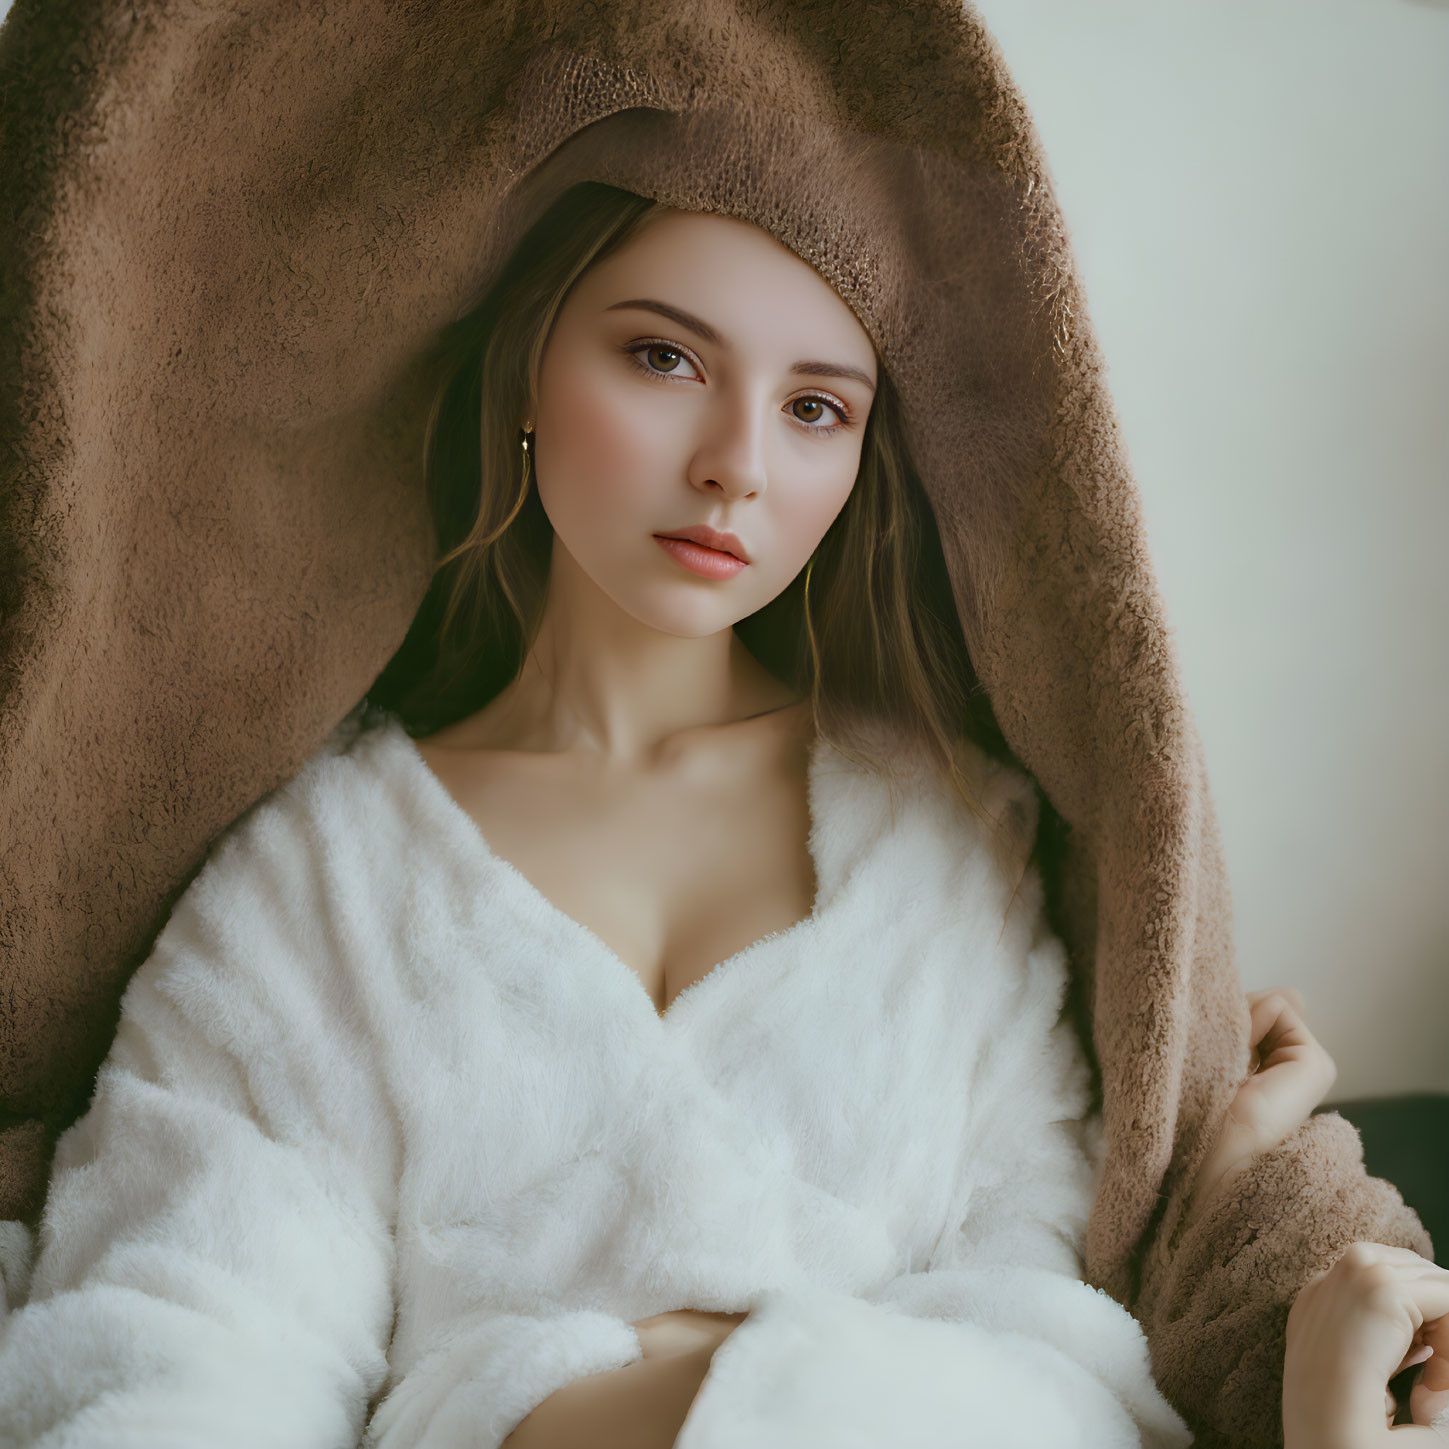 Long-haired woman in white fur coat and brown hat poses serenely.